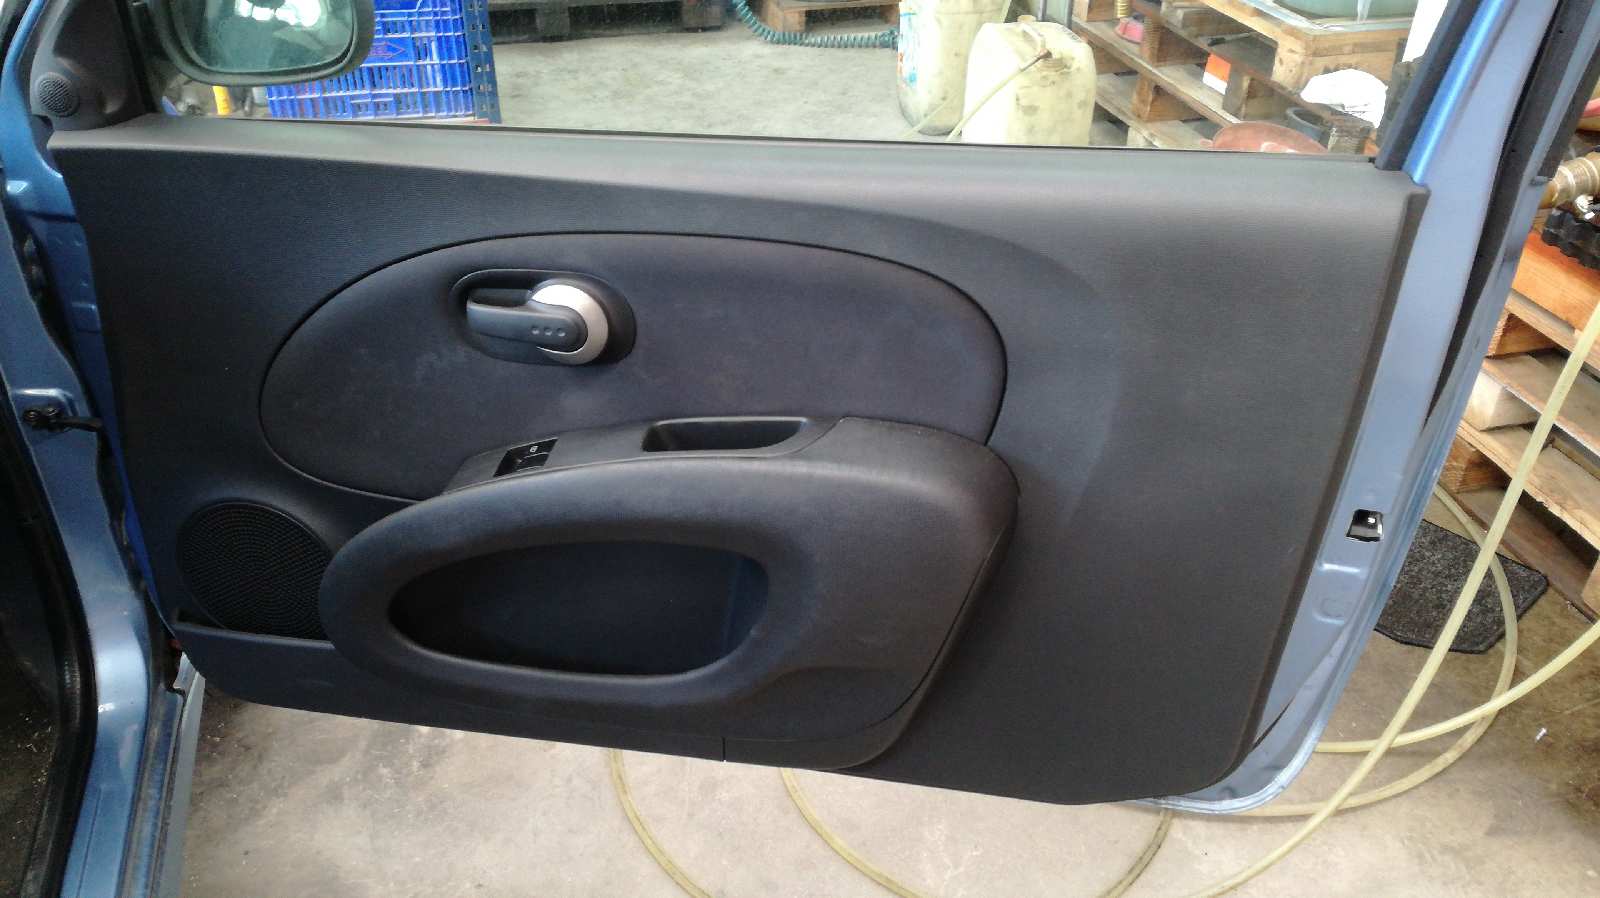 SEAT Micra K12 (2002-2010) Other Interior Parts 80670AX600 21989674